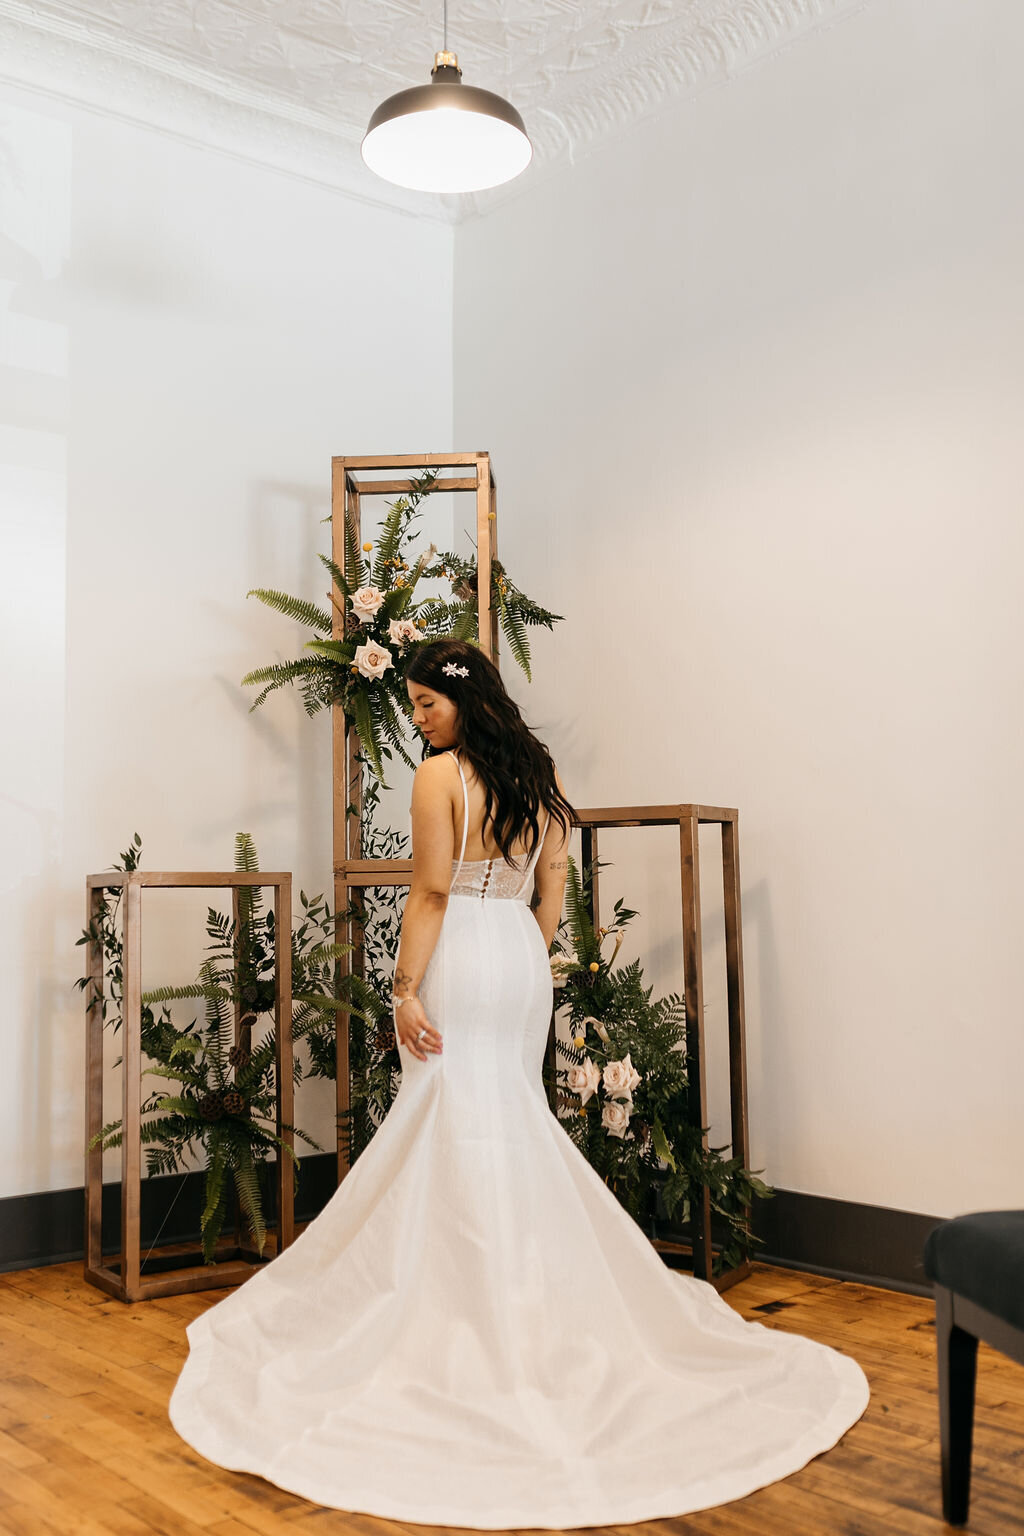 Gladys's short train makes this textured mermaid wedding dress a good fit for a more intimate ceremony venue.